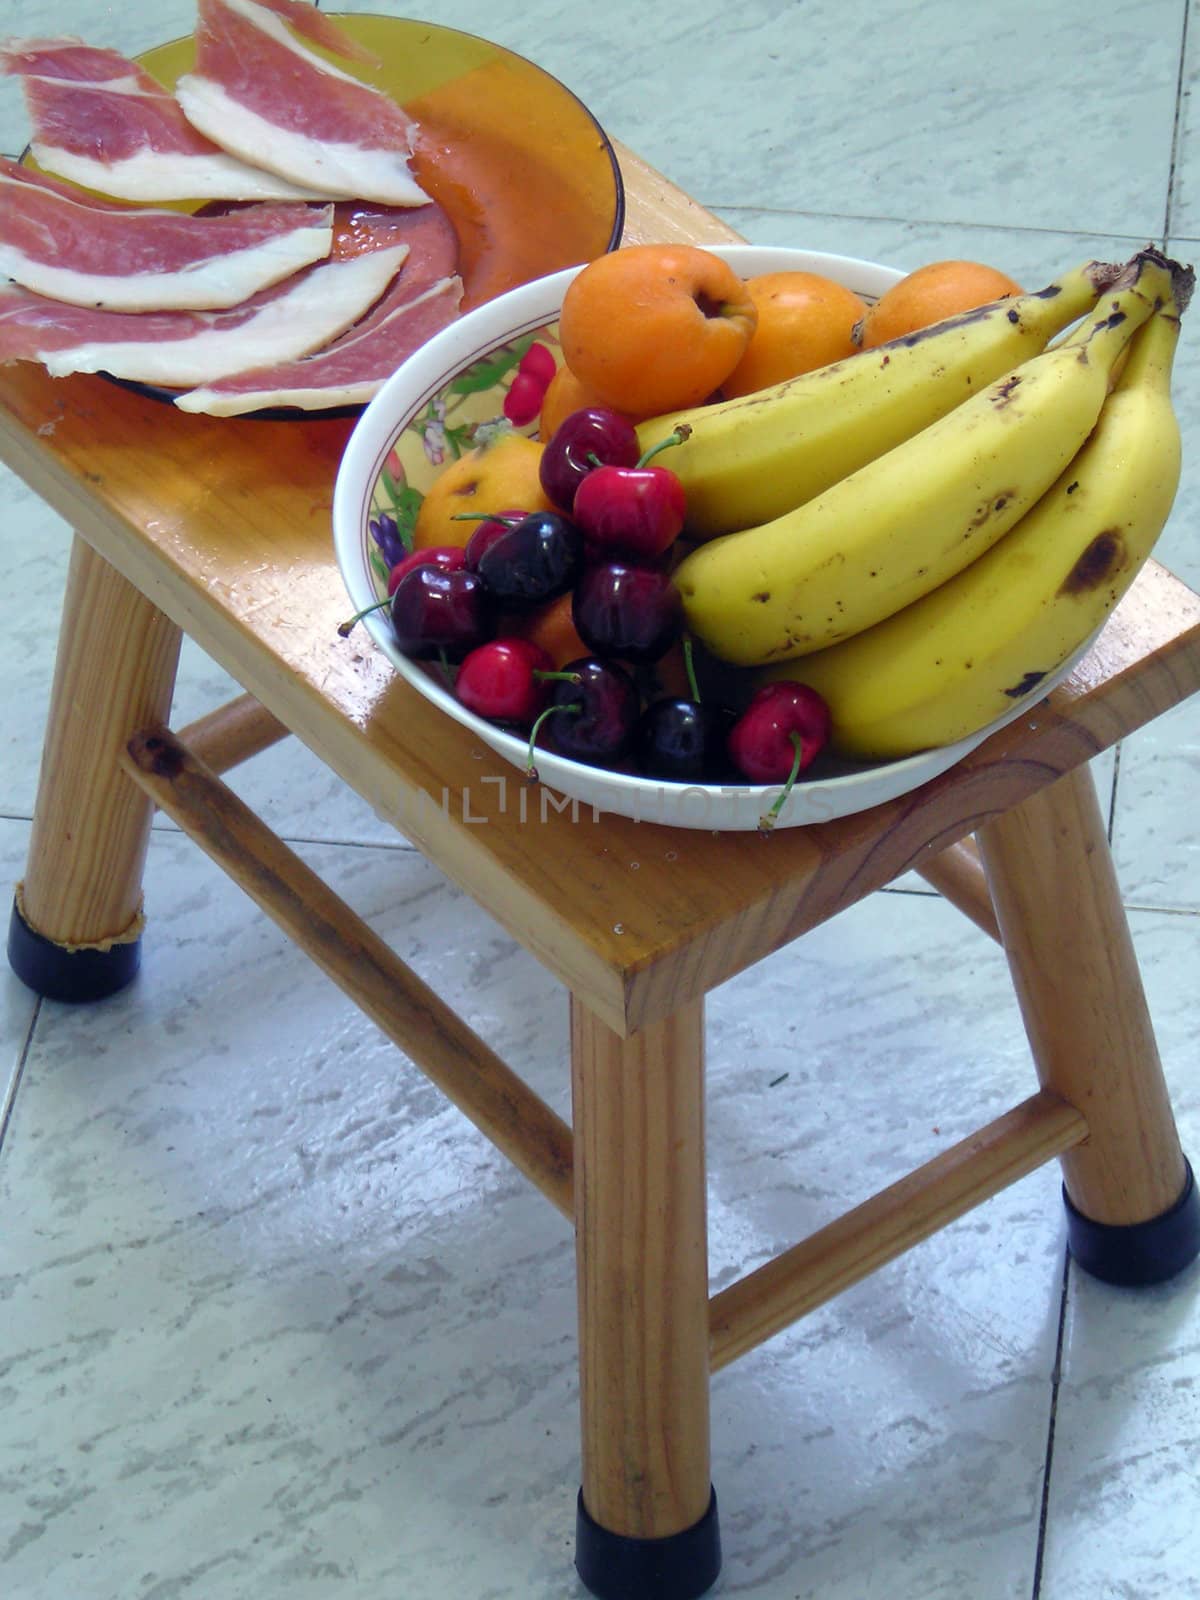 Some fruits and ham from Spain.